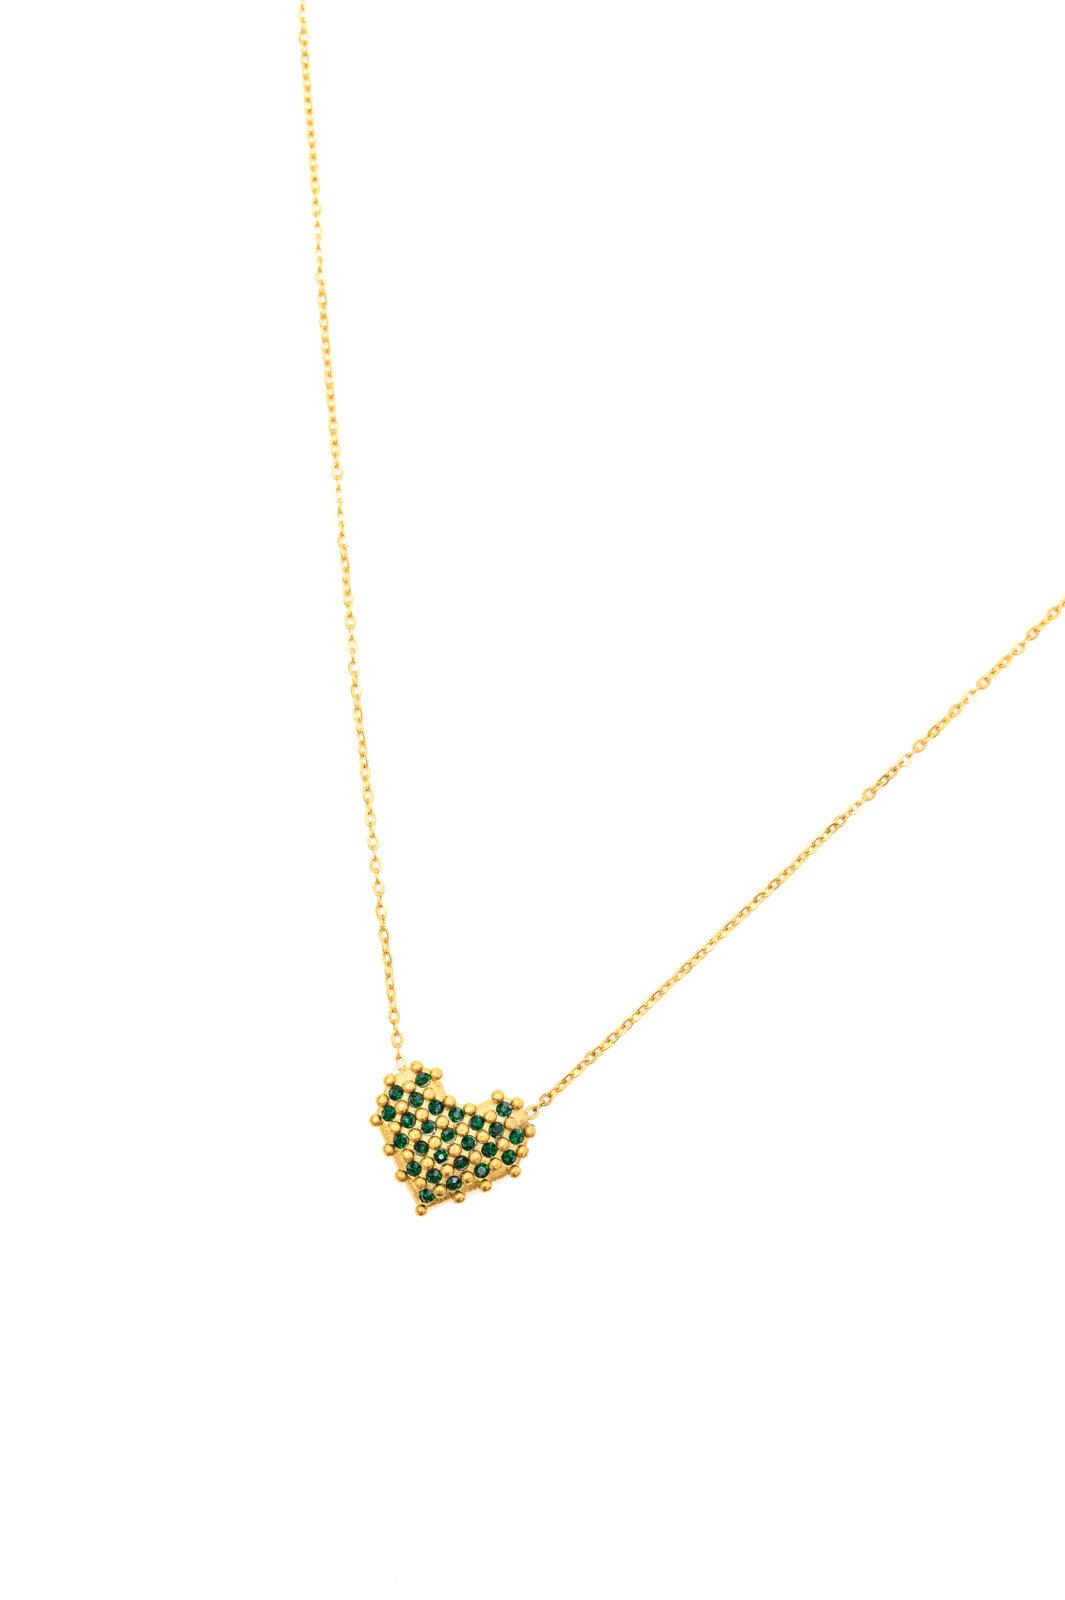 Checkered Heart Necklace - God's Girl Gifts And Apparel